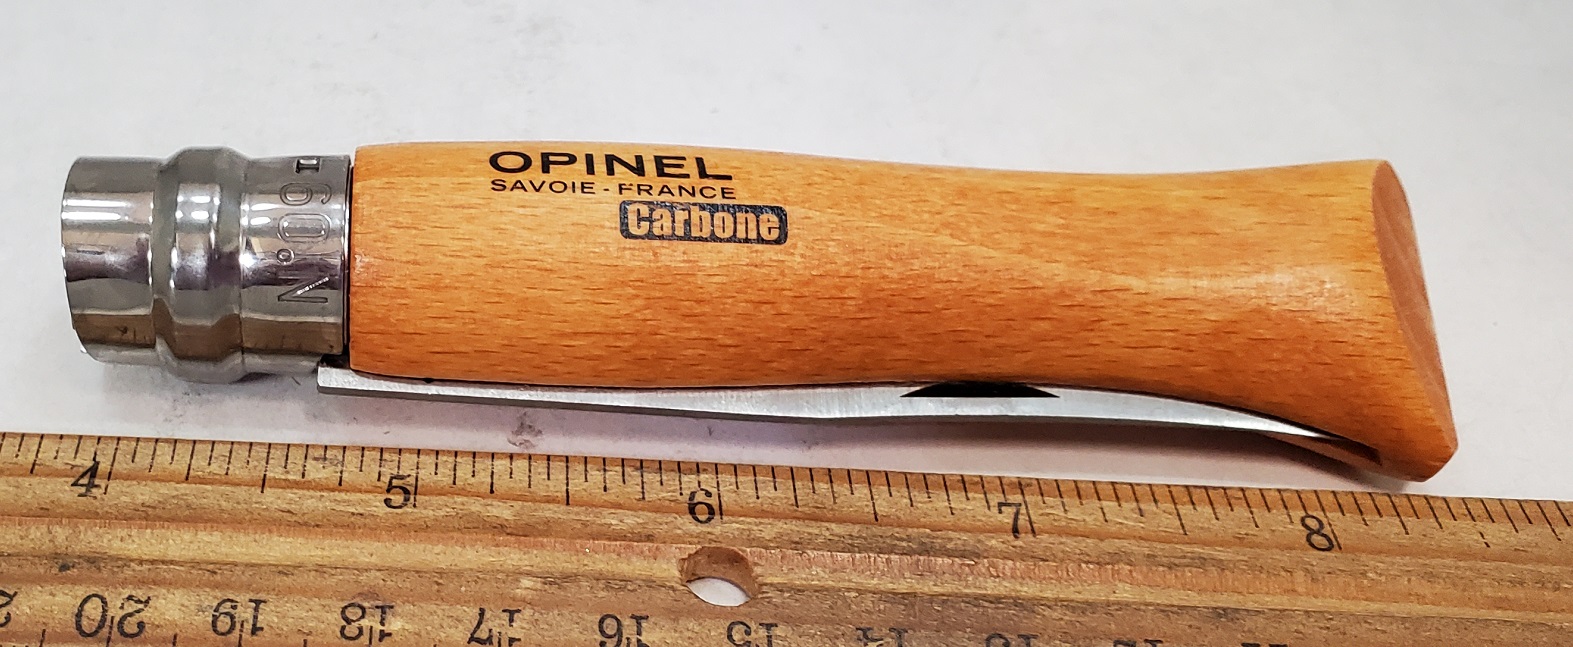 https://heimerdingercutlery.com/wp-content/uploads/2009/06/Opinel-9-10390-4.75-Inch-Carbon-Knife-closed-with-lock-closed.jpg